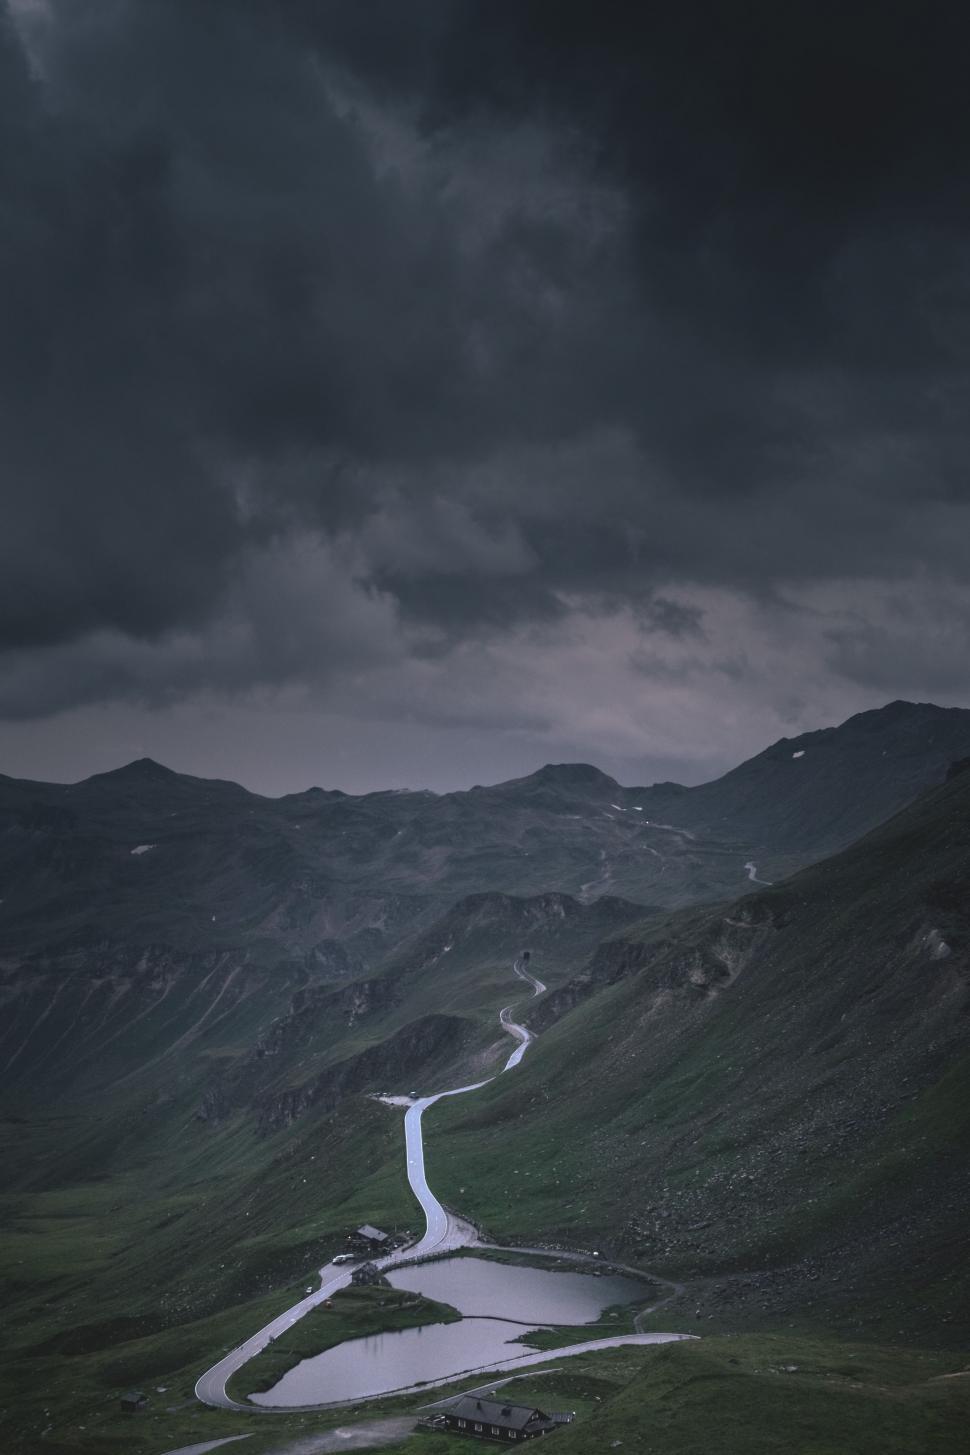 Free Image of A Winding Road in the Mountains Under a Cloudy Sky 